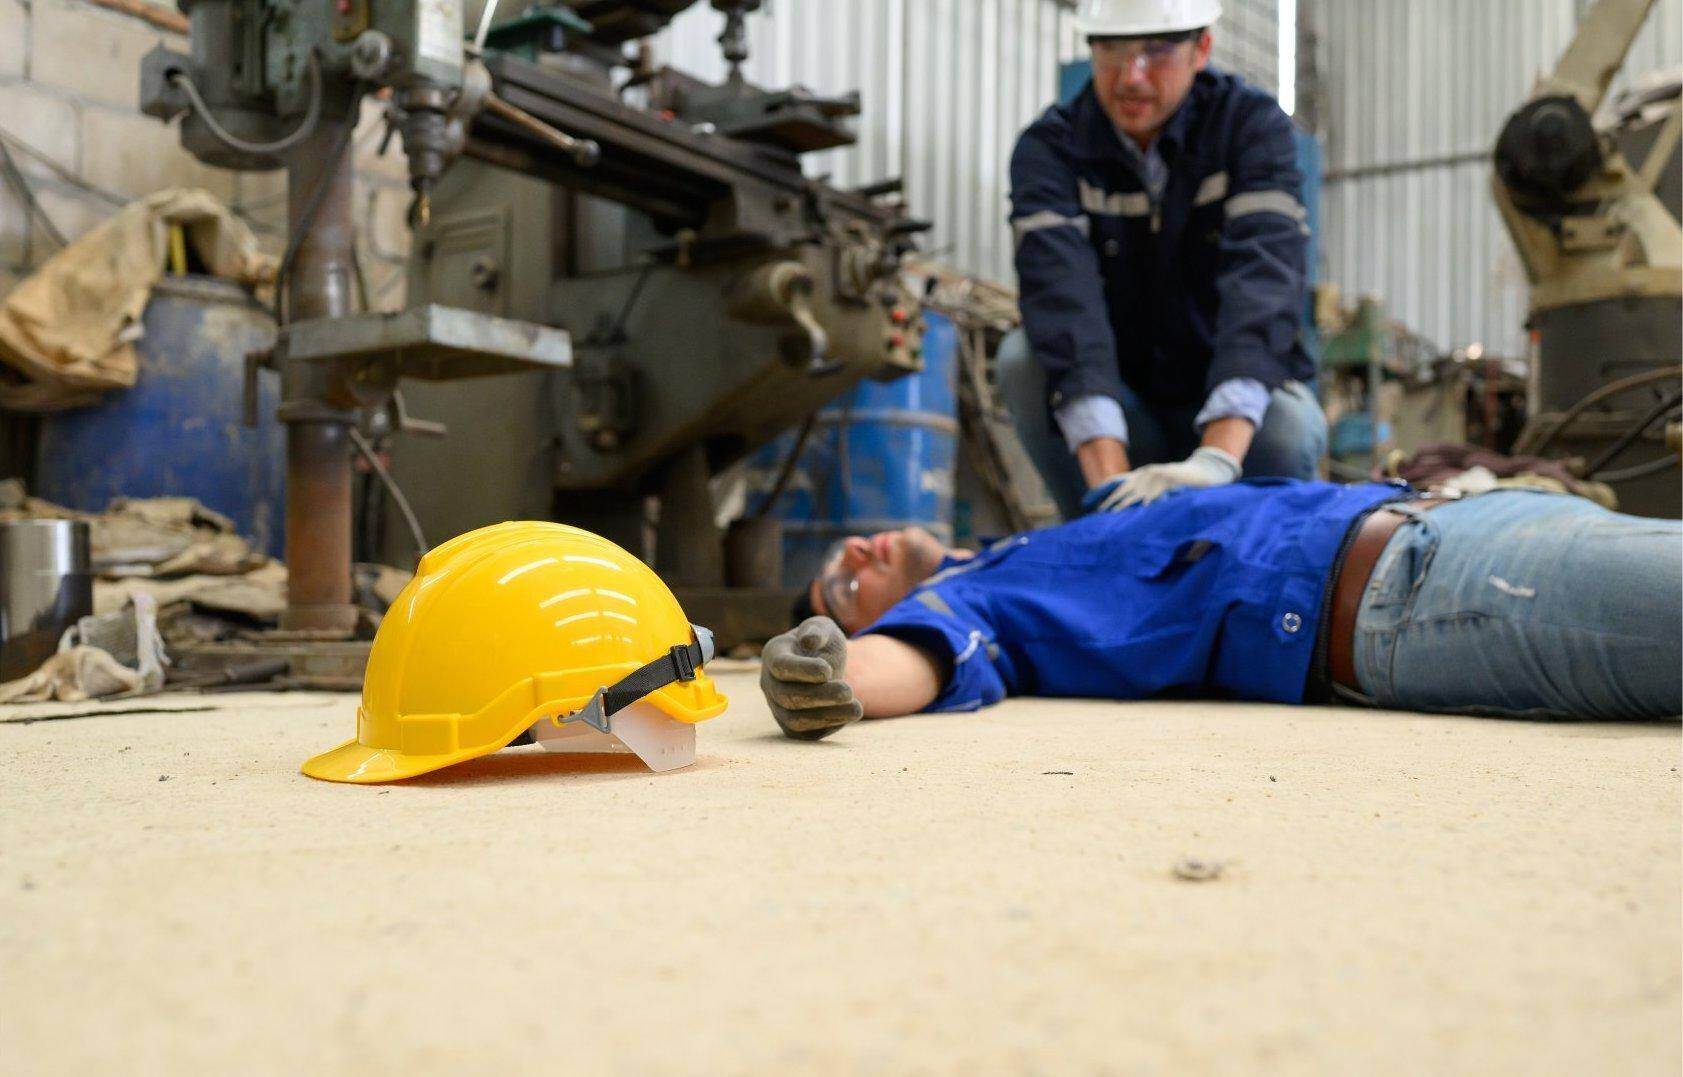 An unconscious man who has been injured on the job who will file for workers compensation in Redan, Georgia